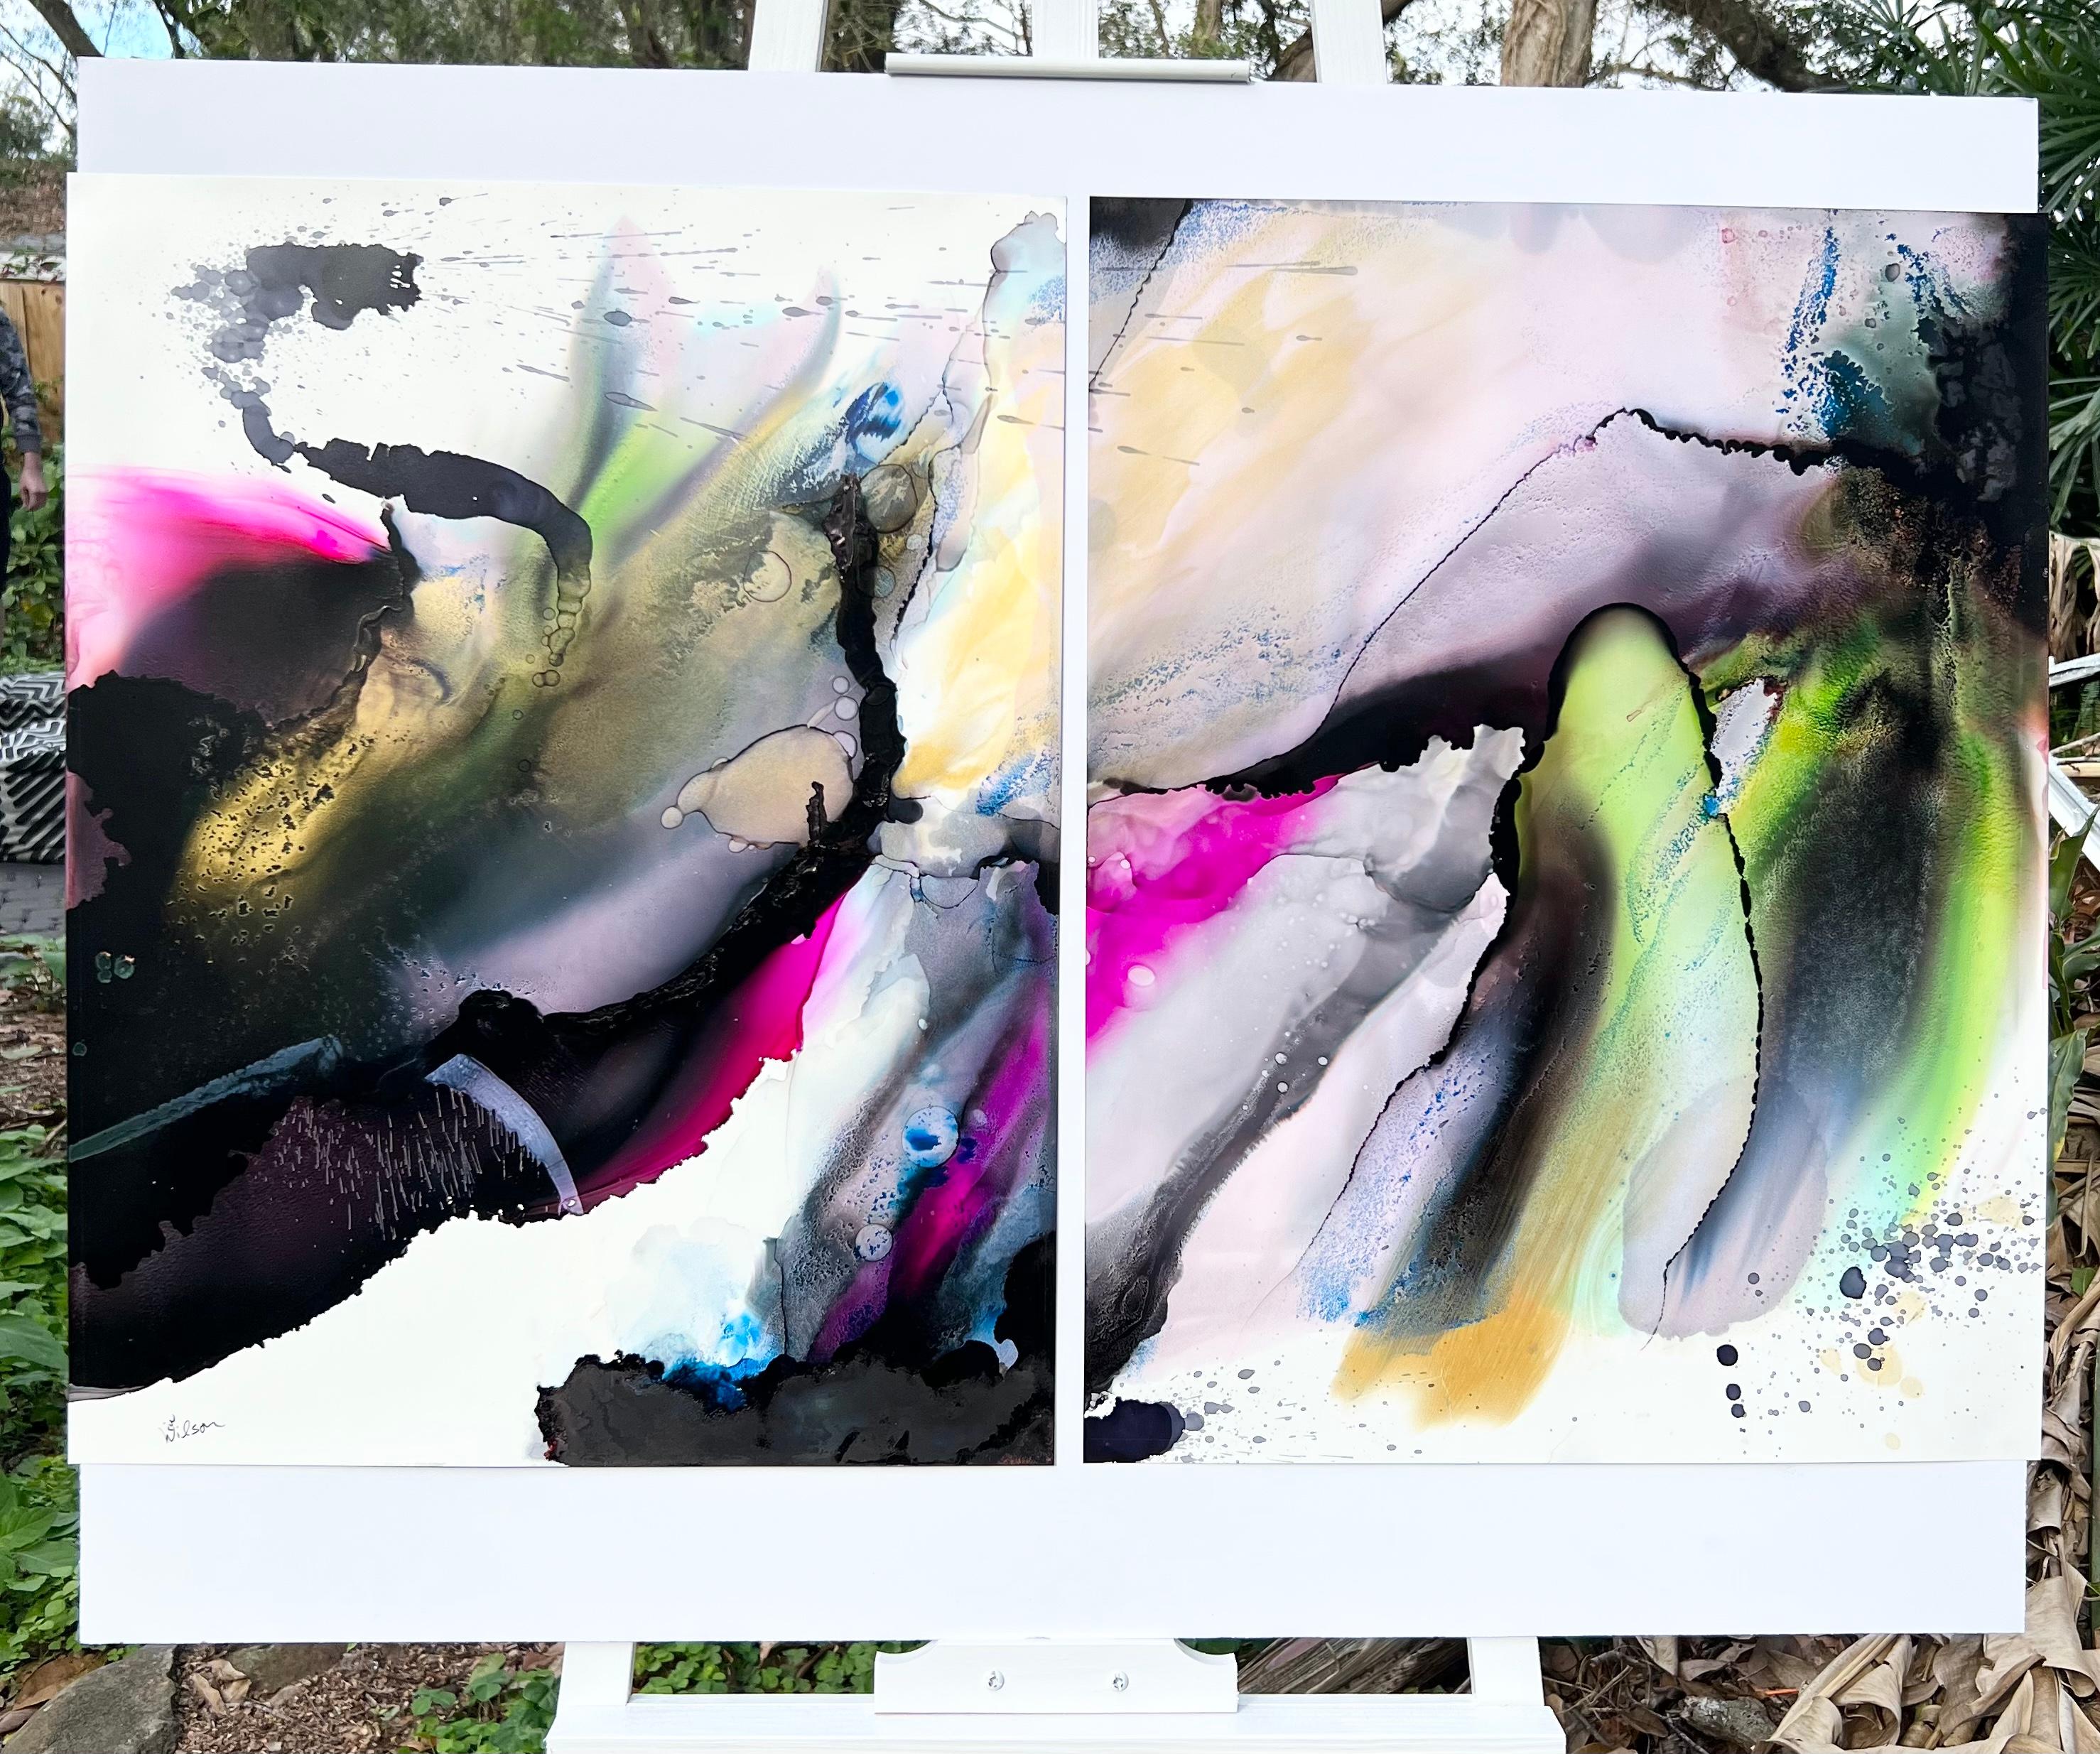 <p>Artist Comments<br>Artist Eric Wilson demonstrates a striking abstraction of layered ink washes, conjuring an impression of a spiritual awakening. Expressive black hues prevail over accents of vivid magenta and lime. The unique diptych explores a